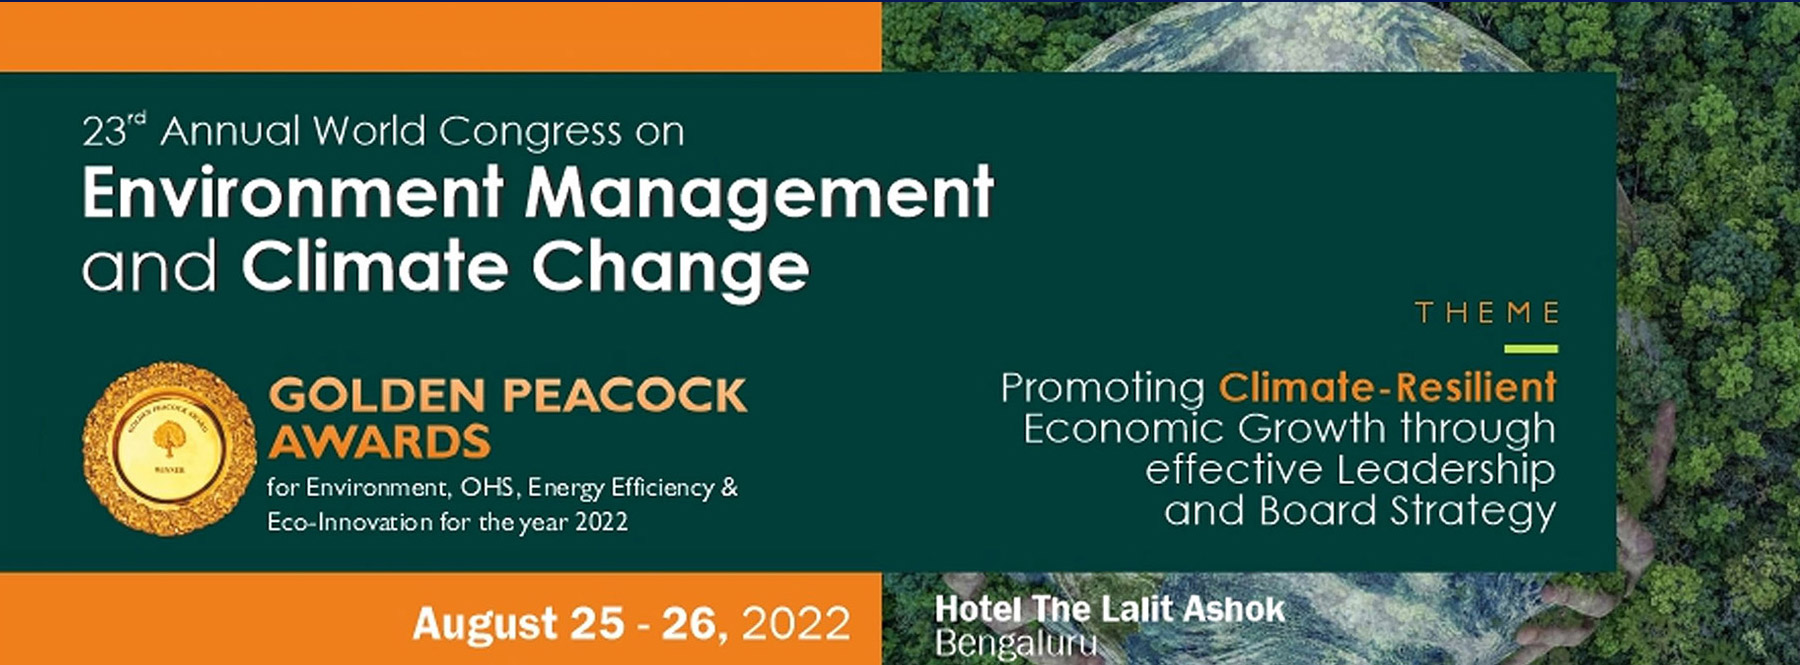 23rd WCEM and Climate Change